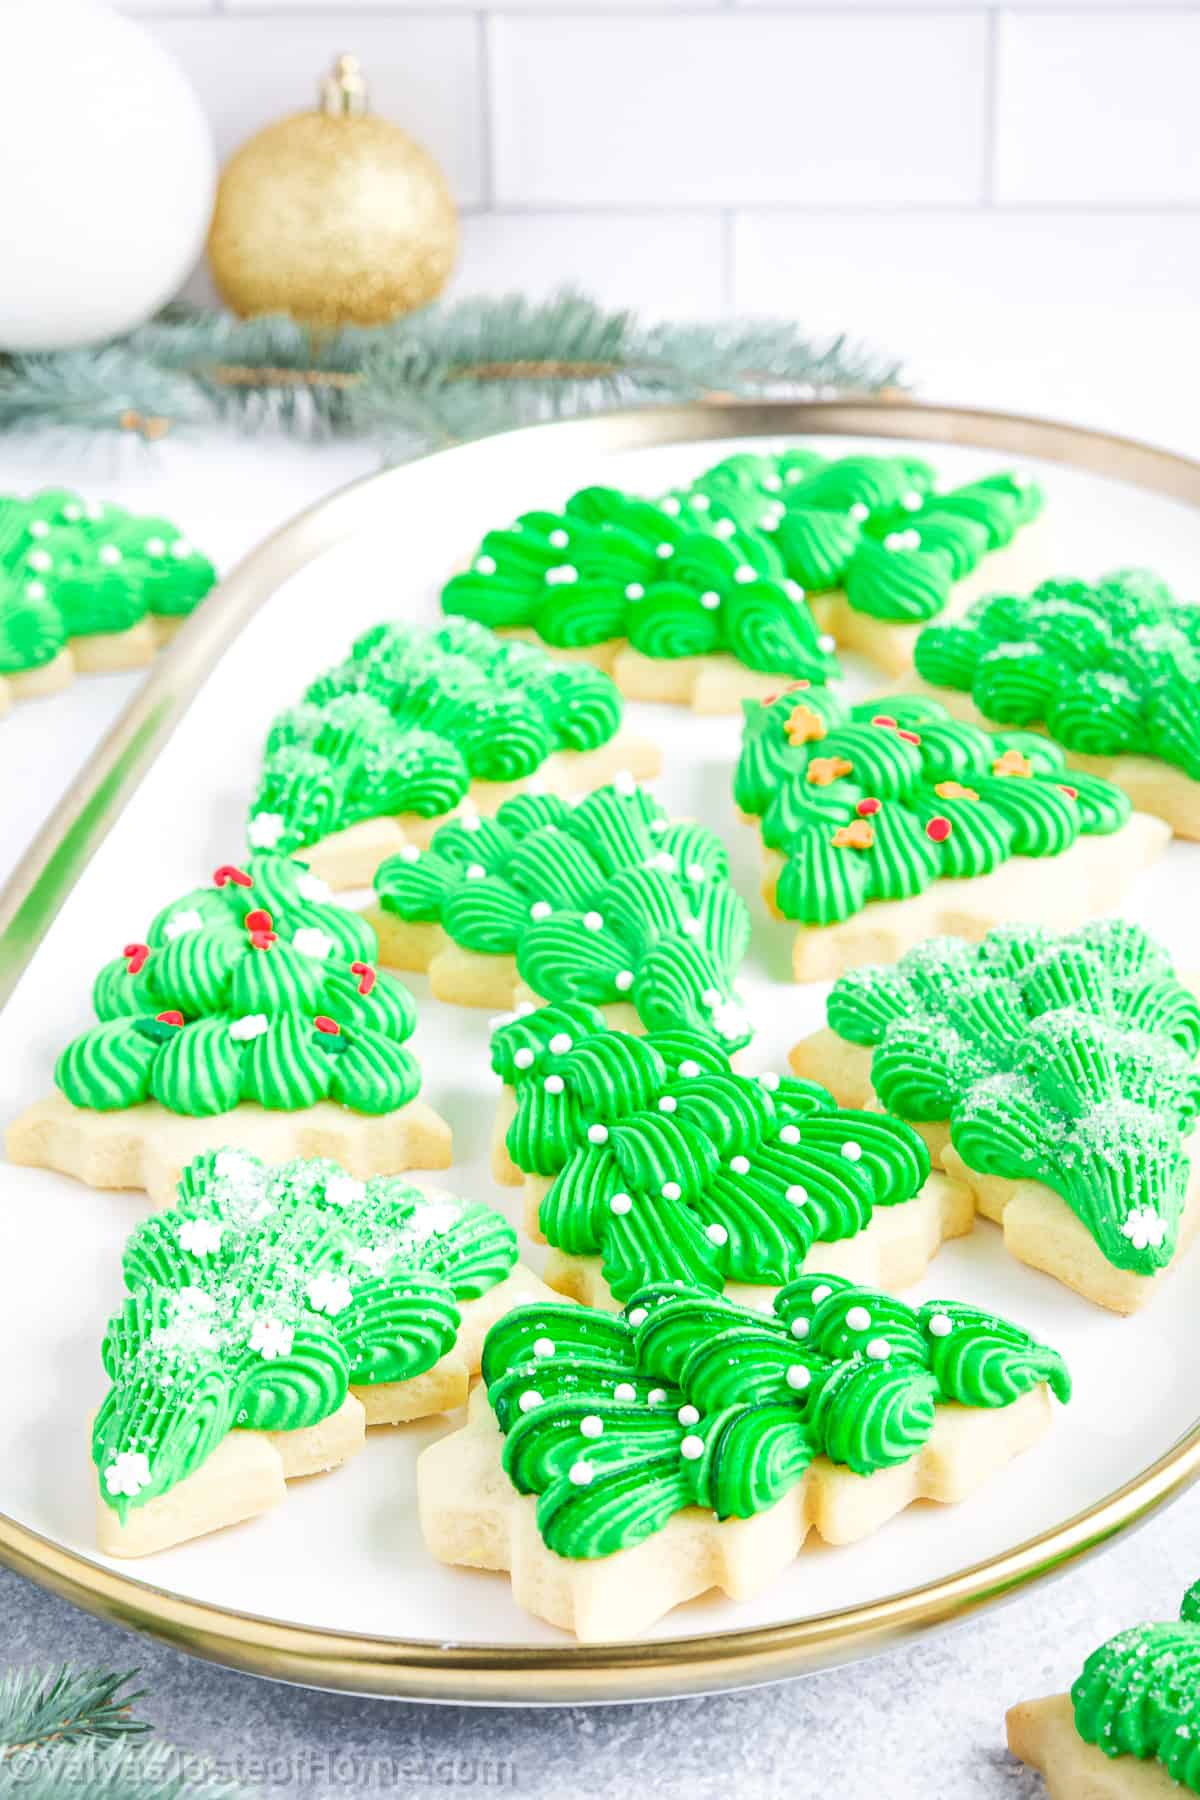 Enjoy the festive season with some delicious Christmas tree sugar cookies. 